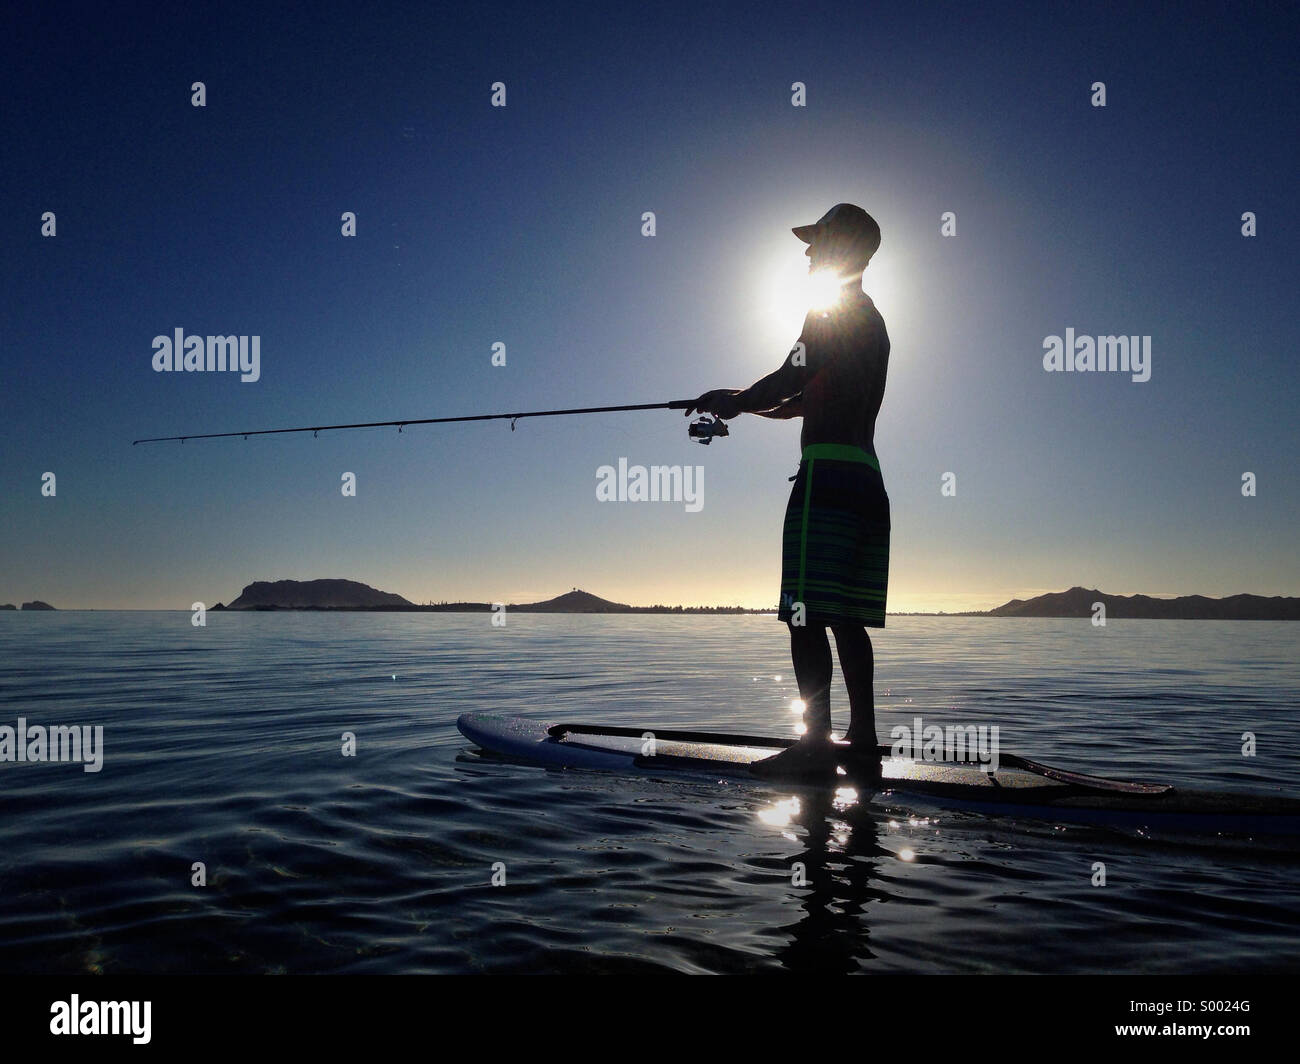 Another day at Kaneohe Bay. Fishing at sunrise. Stand up paddle wake up. Stock Photo